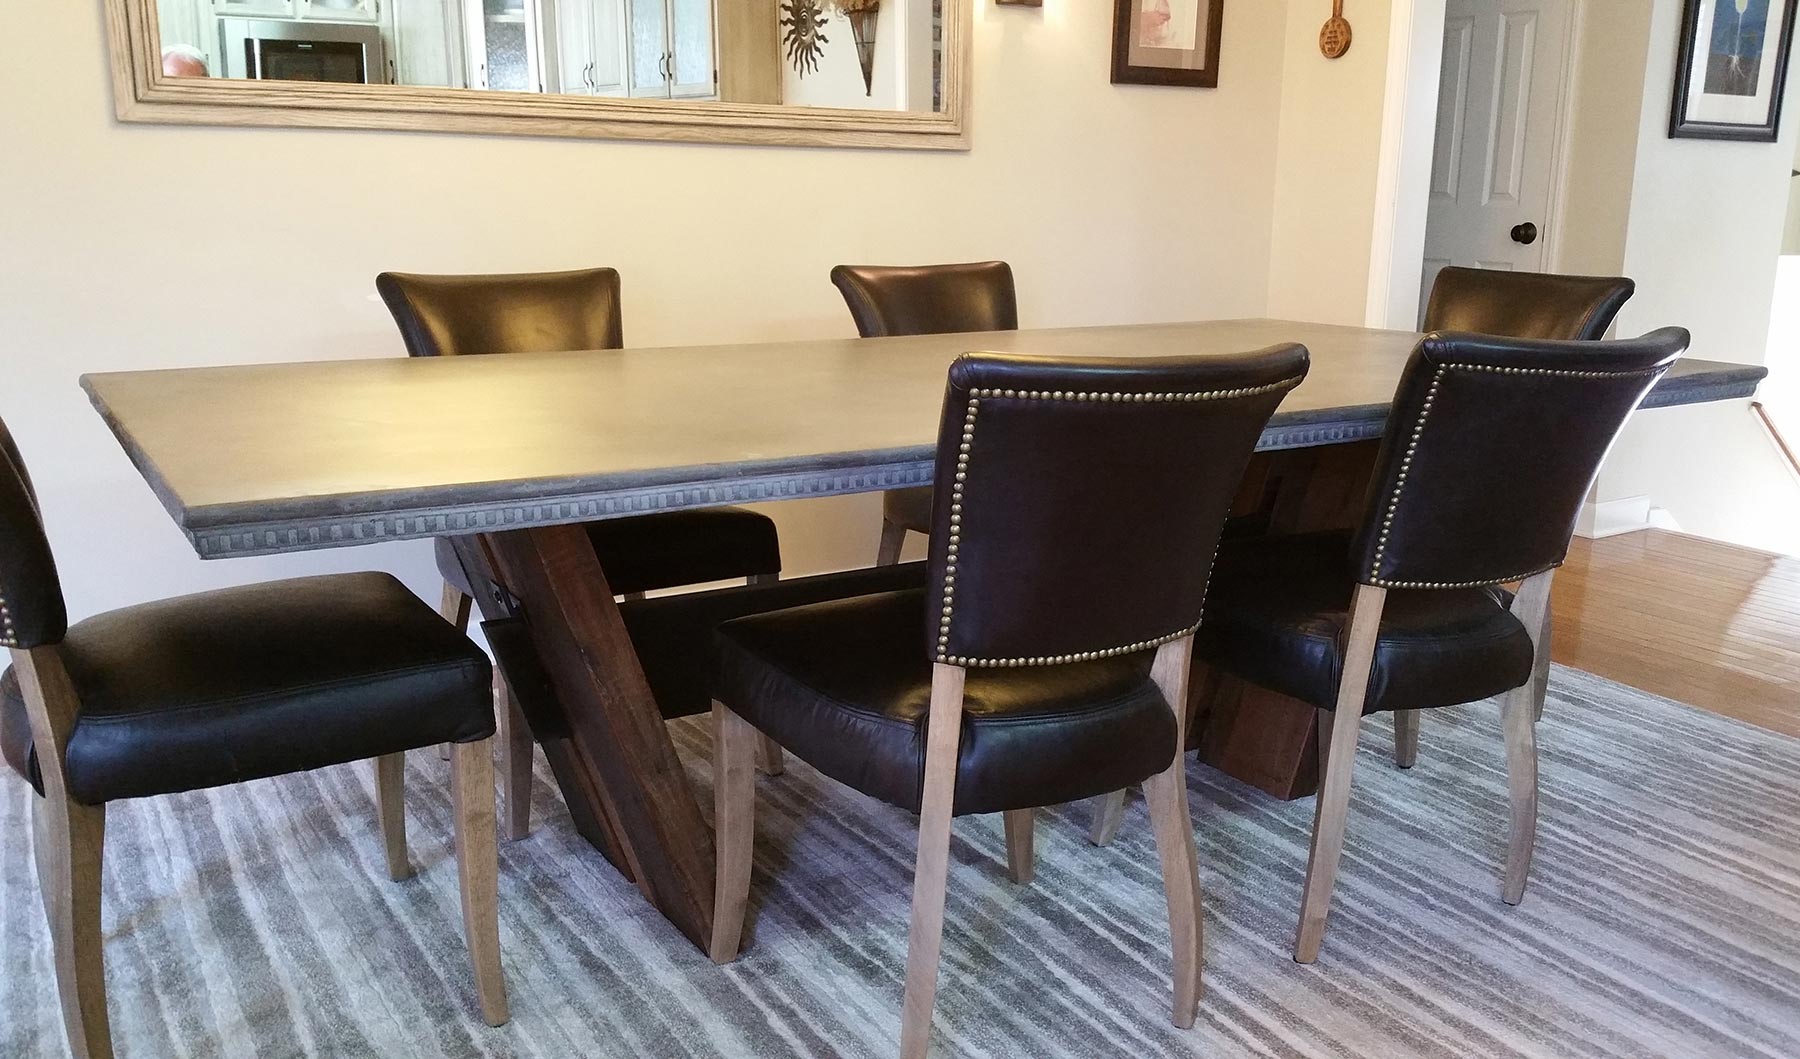 Concrete table in dining room with decorative edges